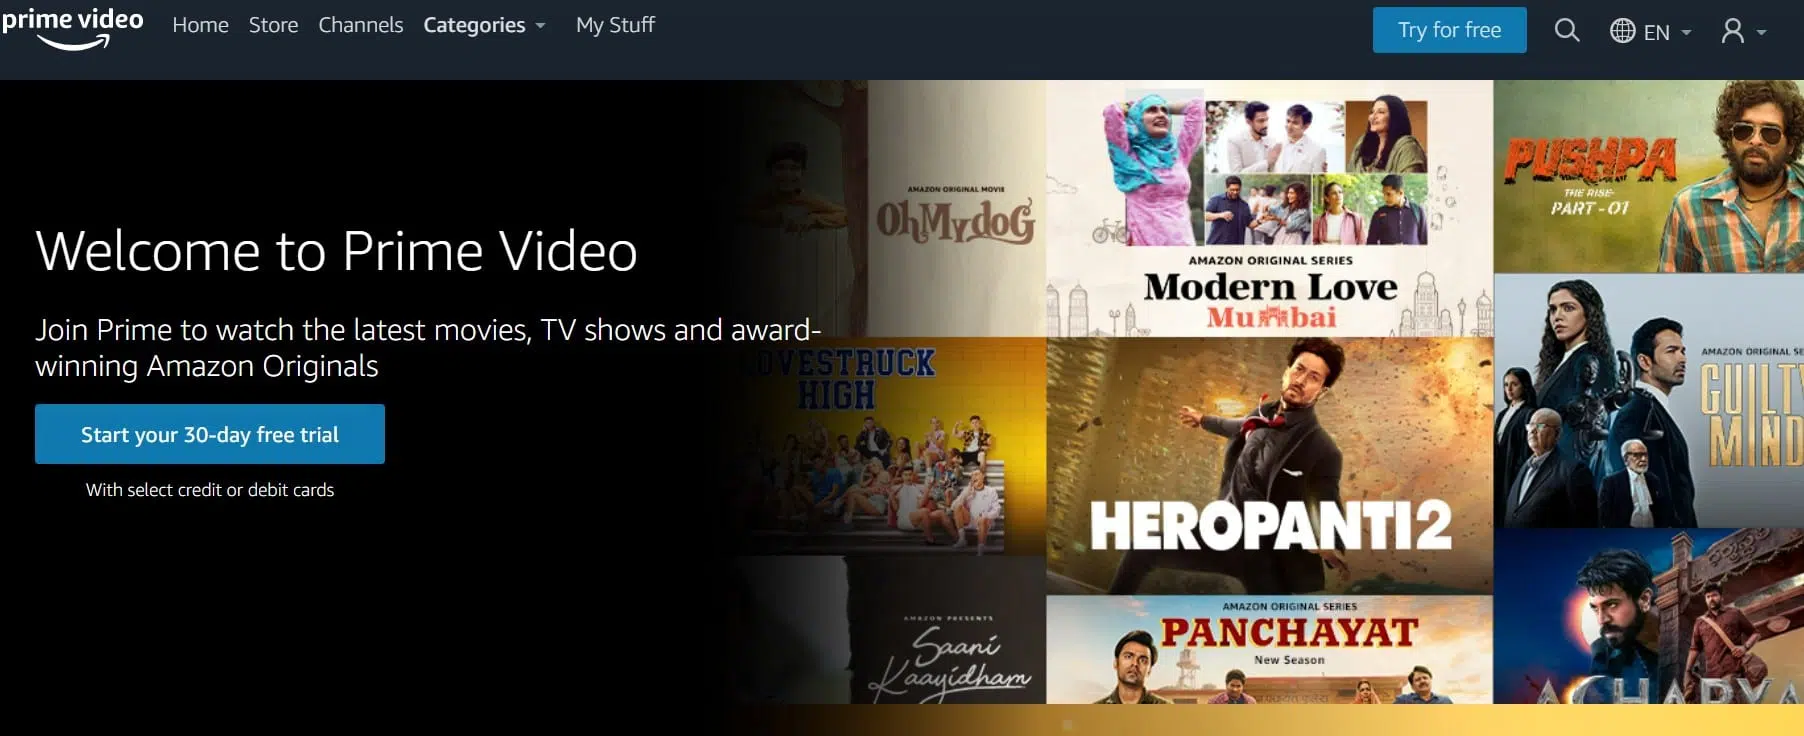 Amazon Prime Video: Best Free Movie Streaming Services